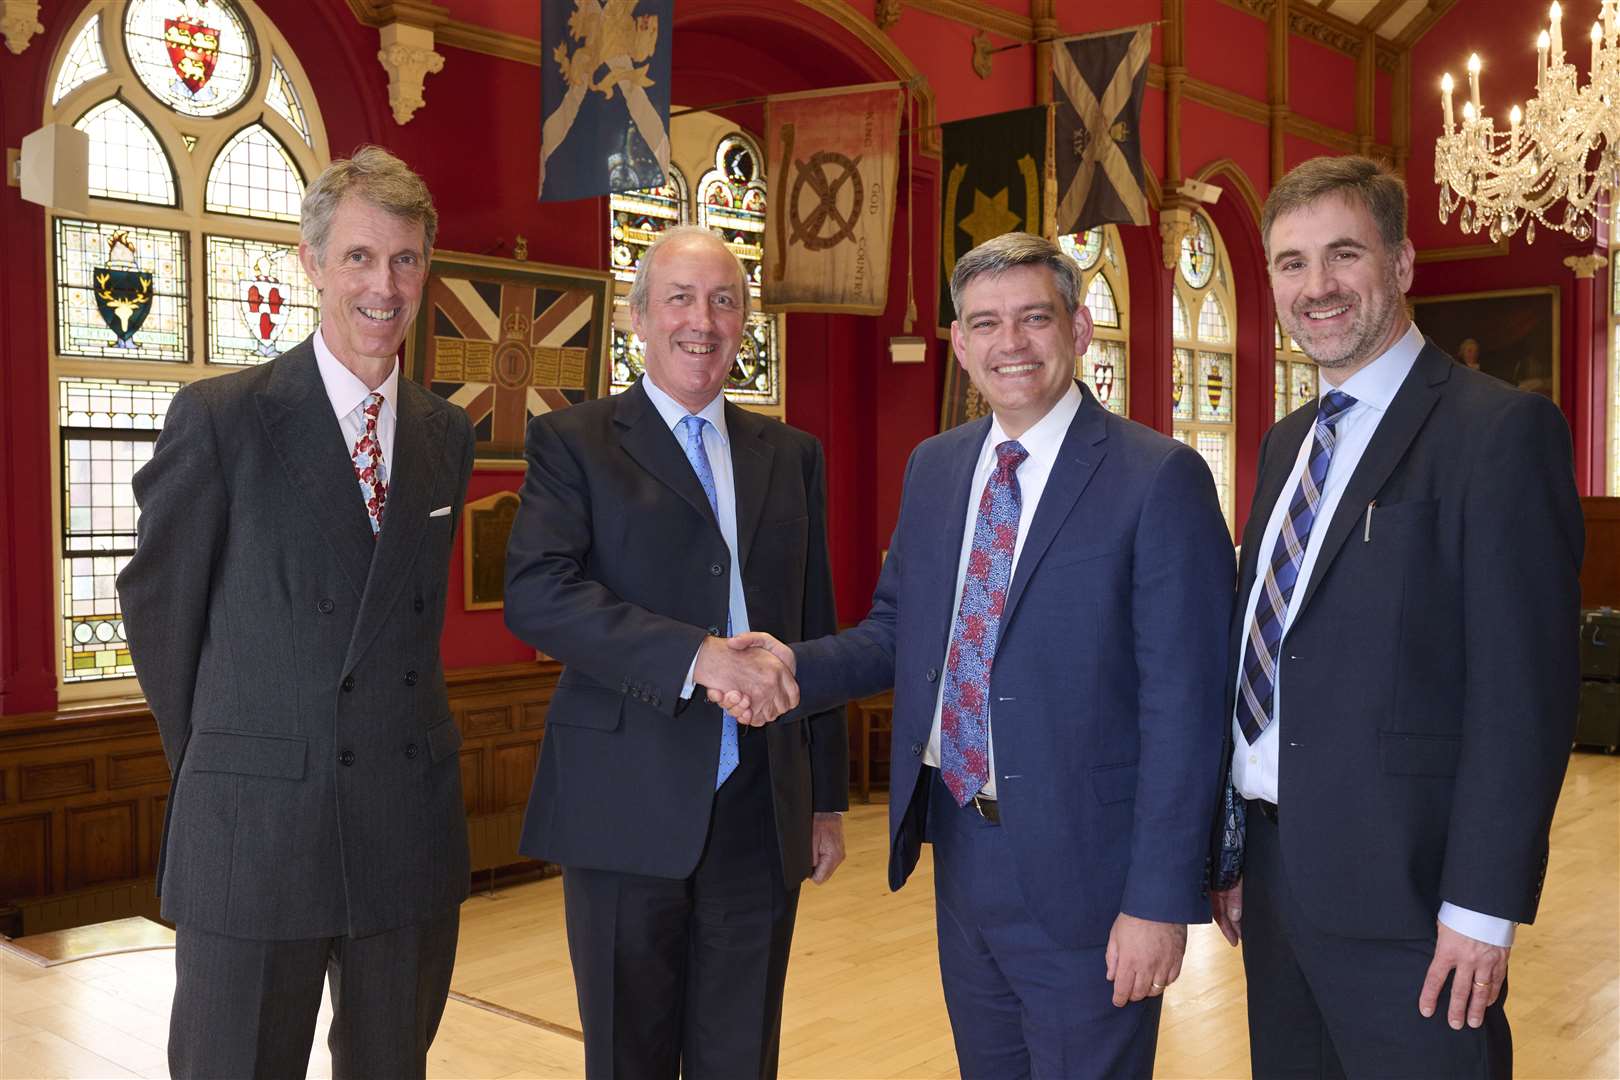 Pictured (from left) are Jonathan Wotherspoon, James Wotherspoon, Angus MacLeod, and Rod MacLean. Jonathan and James Wotherspoon are of Macandrew & Jenkins, whilst Angus Macleod and Rod MacLean represent WJM as Head of the Inverness Office and Managing Partner respectively.